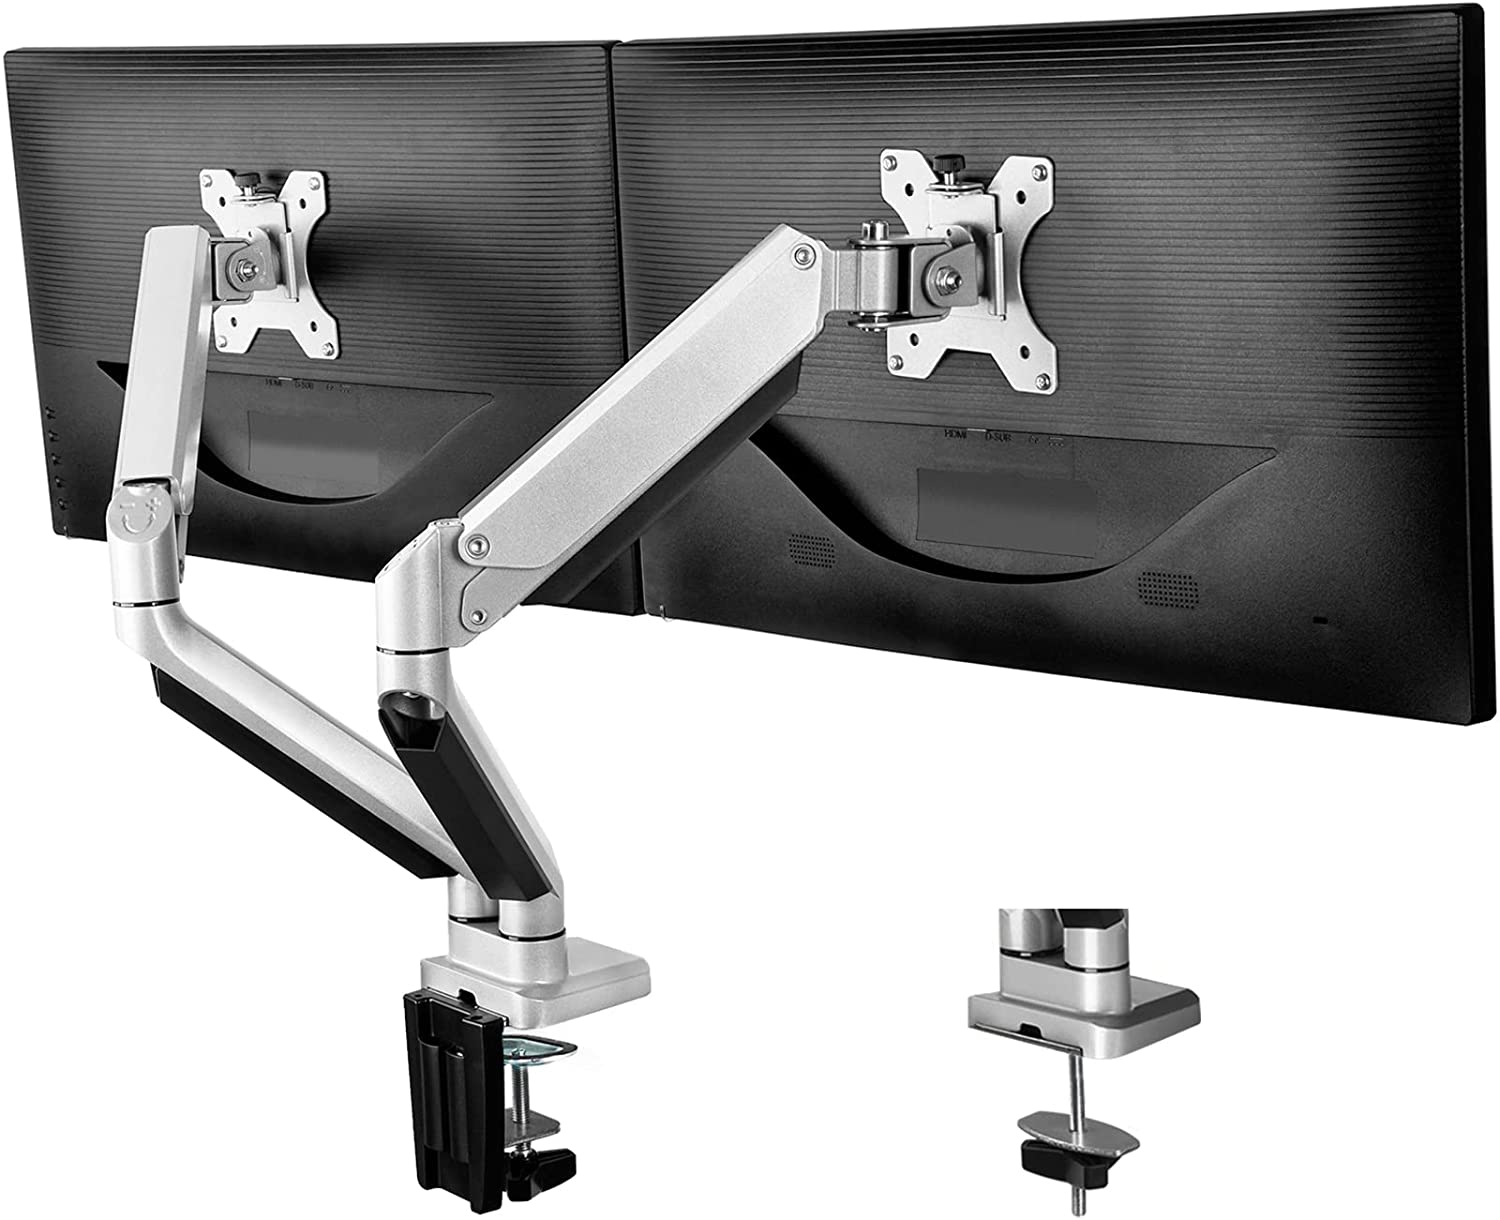 ELIVED Monitor Mount 2 Monitors for 13-32 Inch Screens with VESA